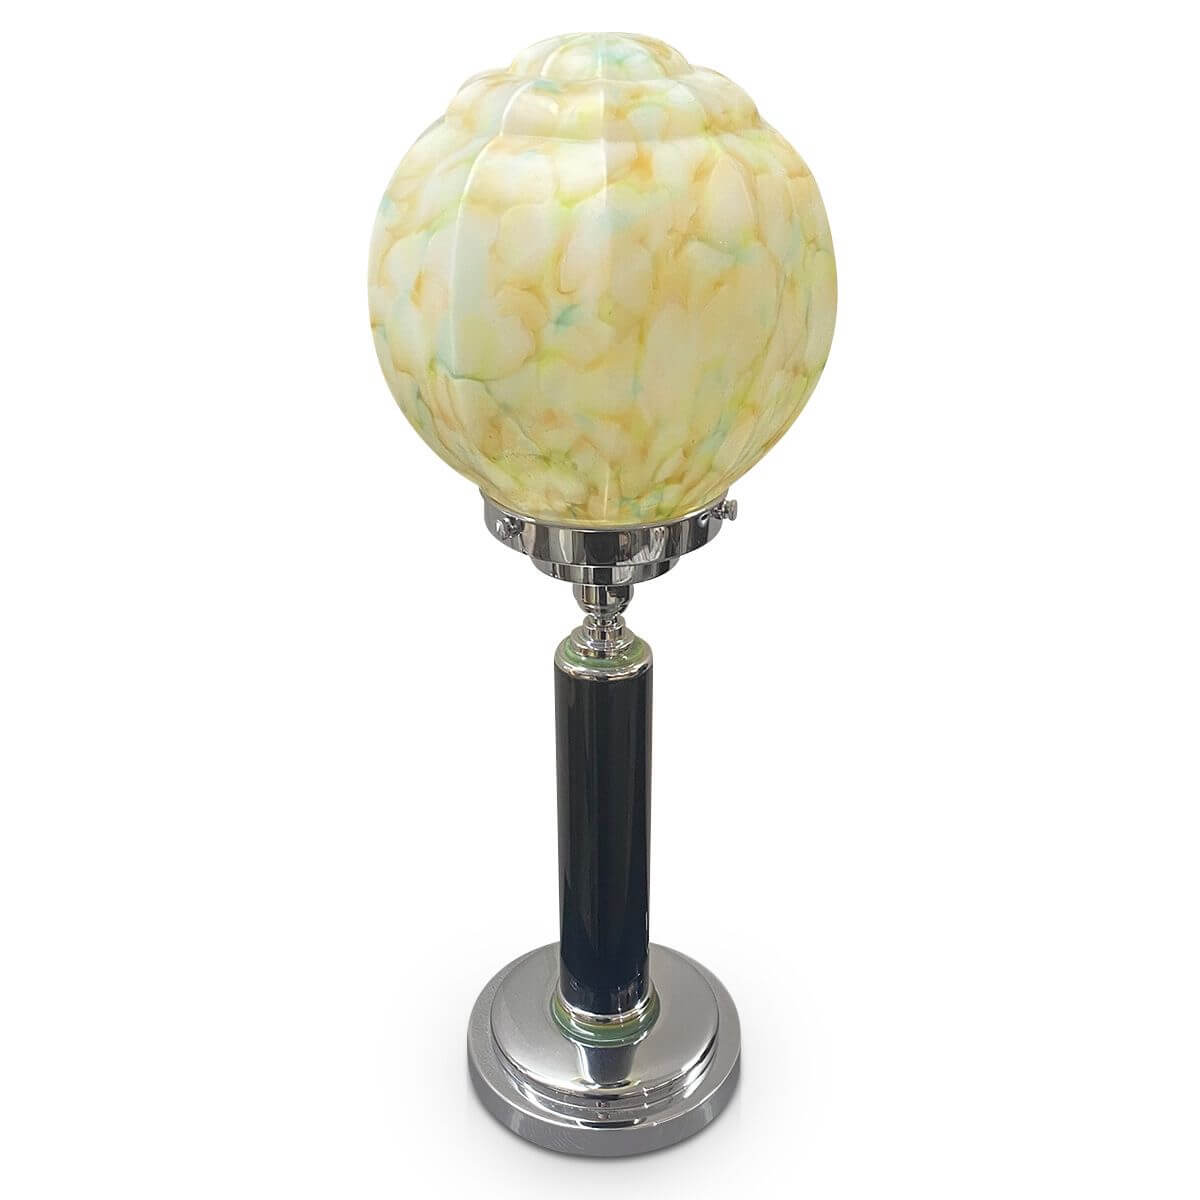 Art Deco Black Lamp mottled green and yellow shade large